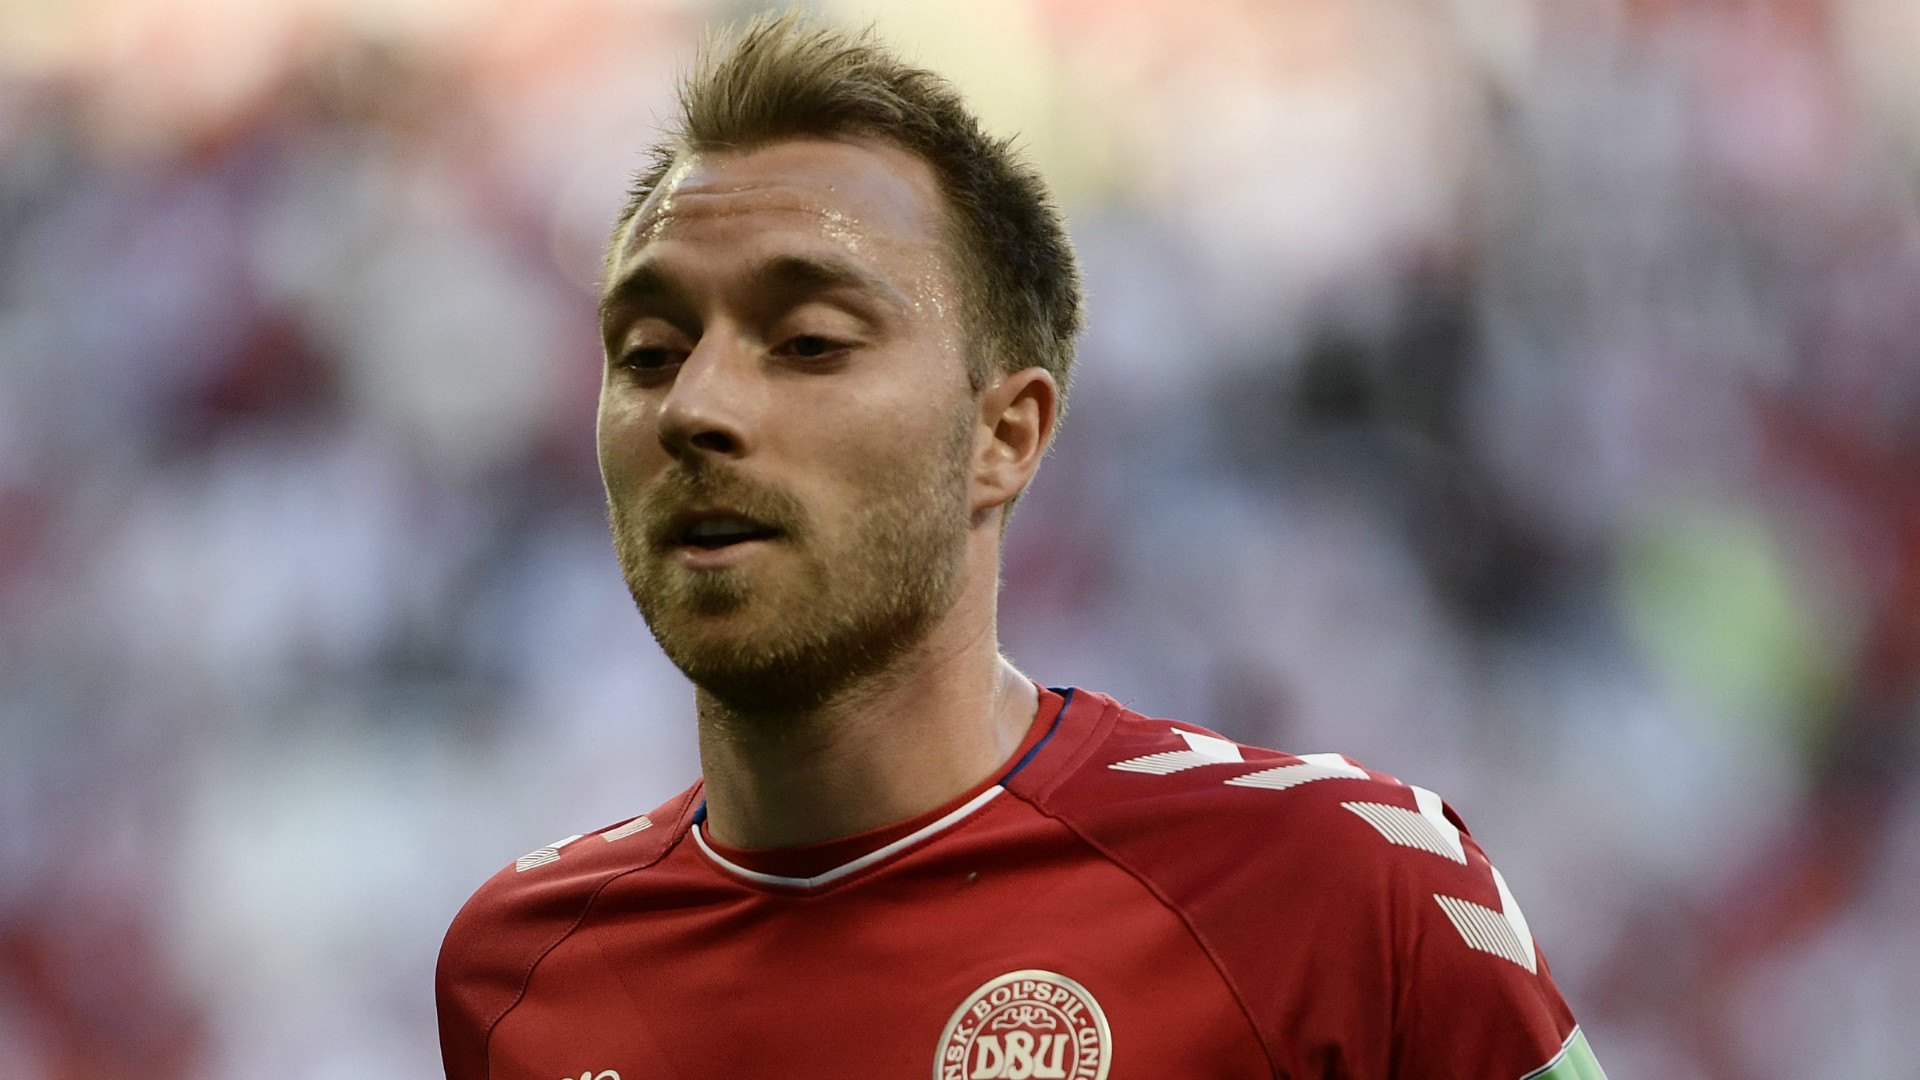 Eriksen needs trophies if he wants to be considered a true Denmark legend, says Laudrup